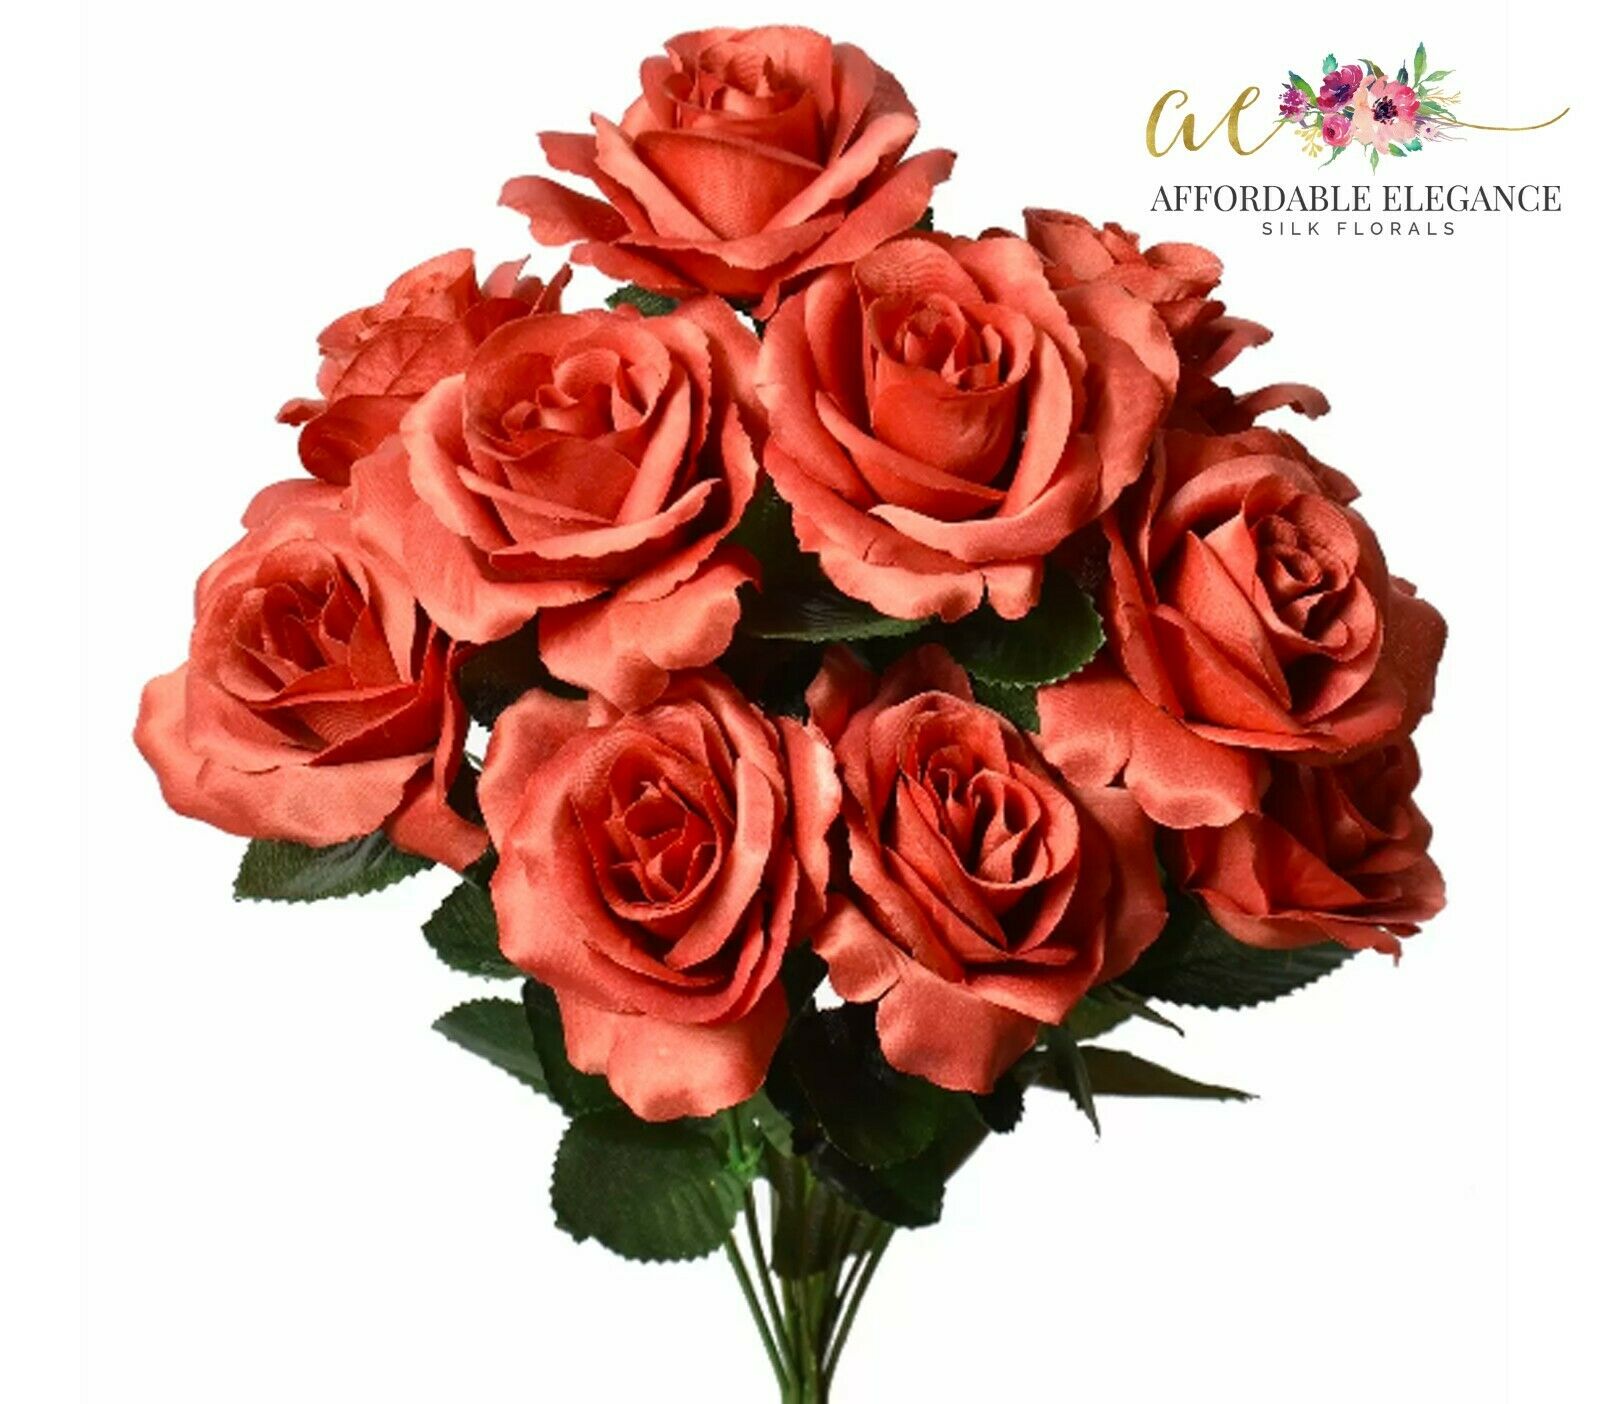 12 Artificial 4" Open Roses Silk Flowers Wedding Bouquets Centerpieces Fake Faux